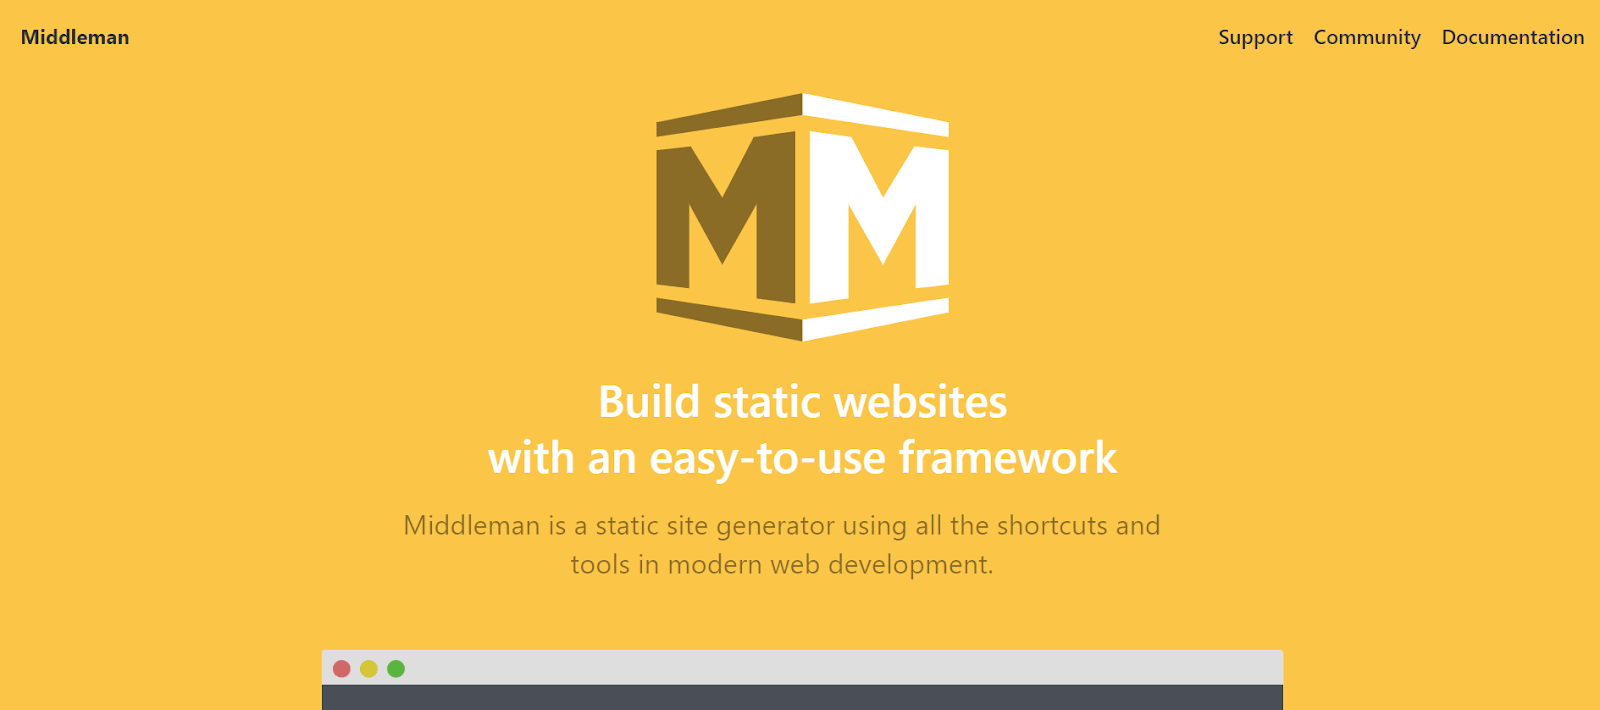 Middleman is a powerful and top static site generator